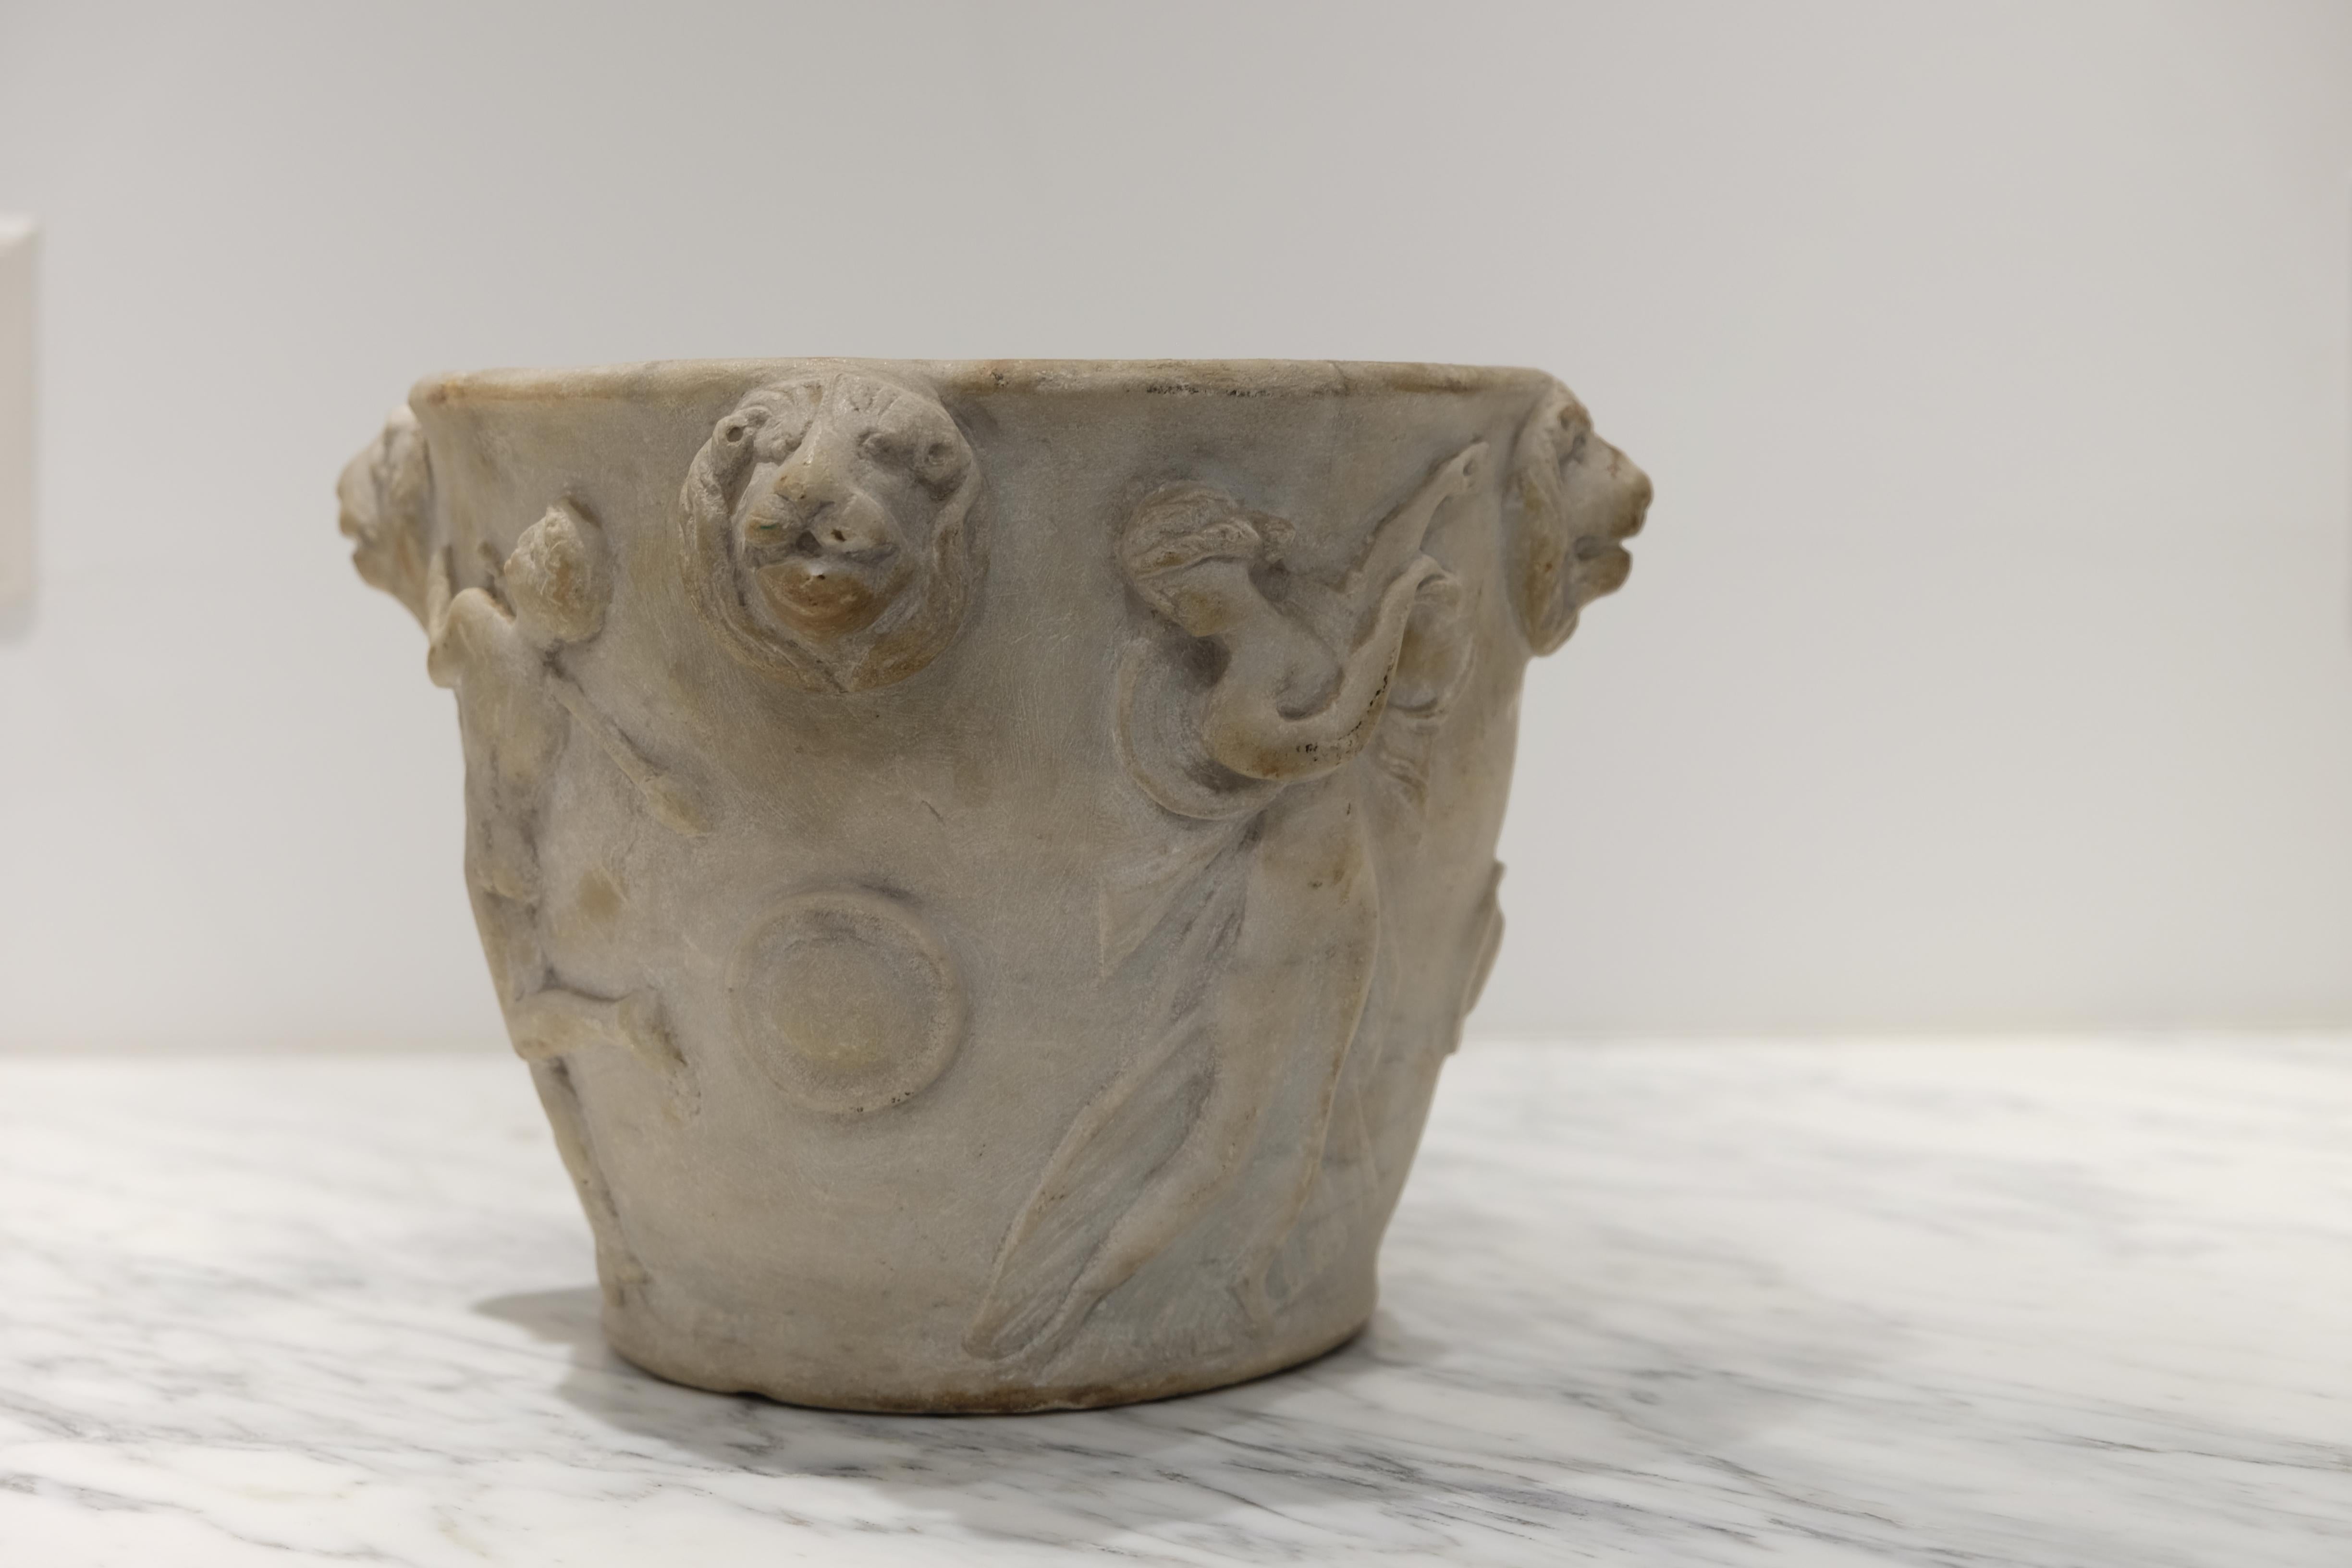 A very impressive late 18th-early 19th century hand carved Italian neoclassical style planter adorned with figures of nymphs and four lion masks. Beautifully chiseled and stippled interior. Interior diameter of 8